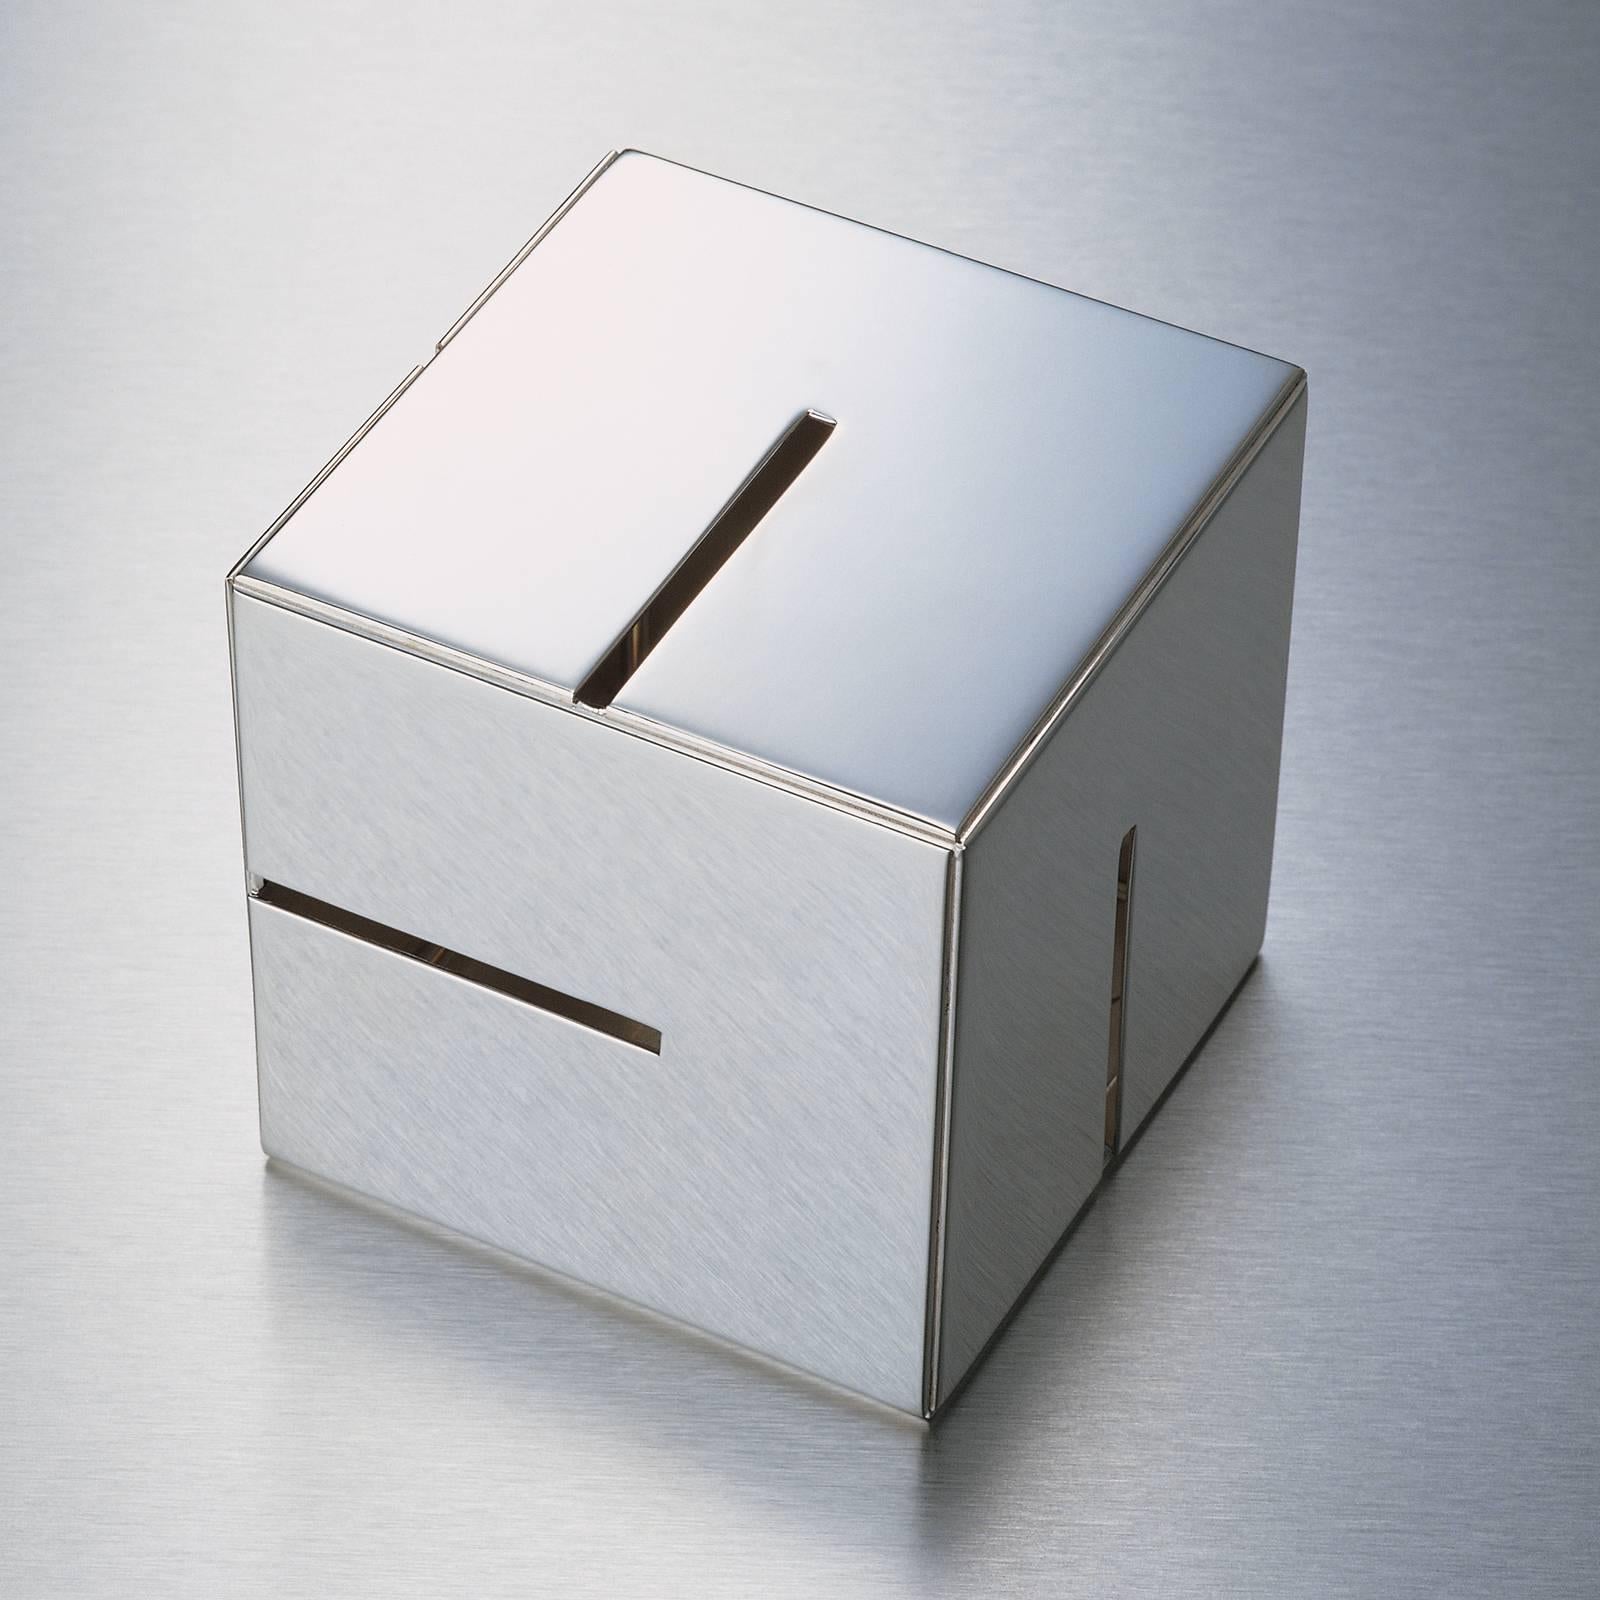 Designed by Piero Lissoni in 2001 and crafted of 925/1000 silver, this piggy bank is a stunning piece of decor that can be displayed as sculpture in a contemporary home. Its geometric silhouette is a perfect cube, whose identical sides are adorned